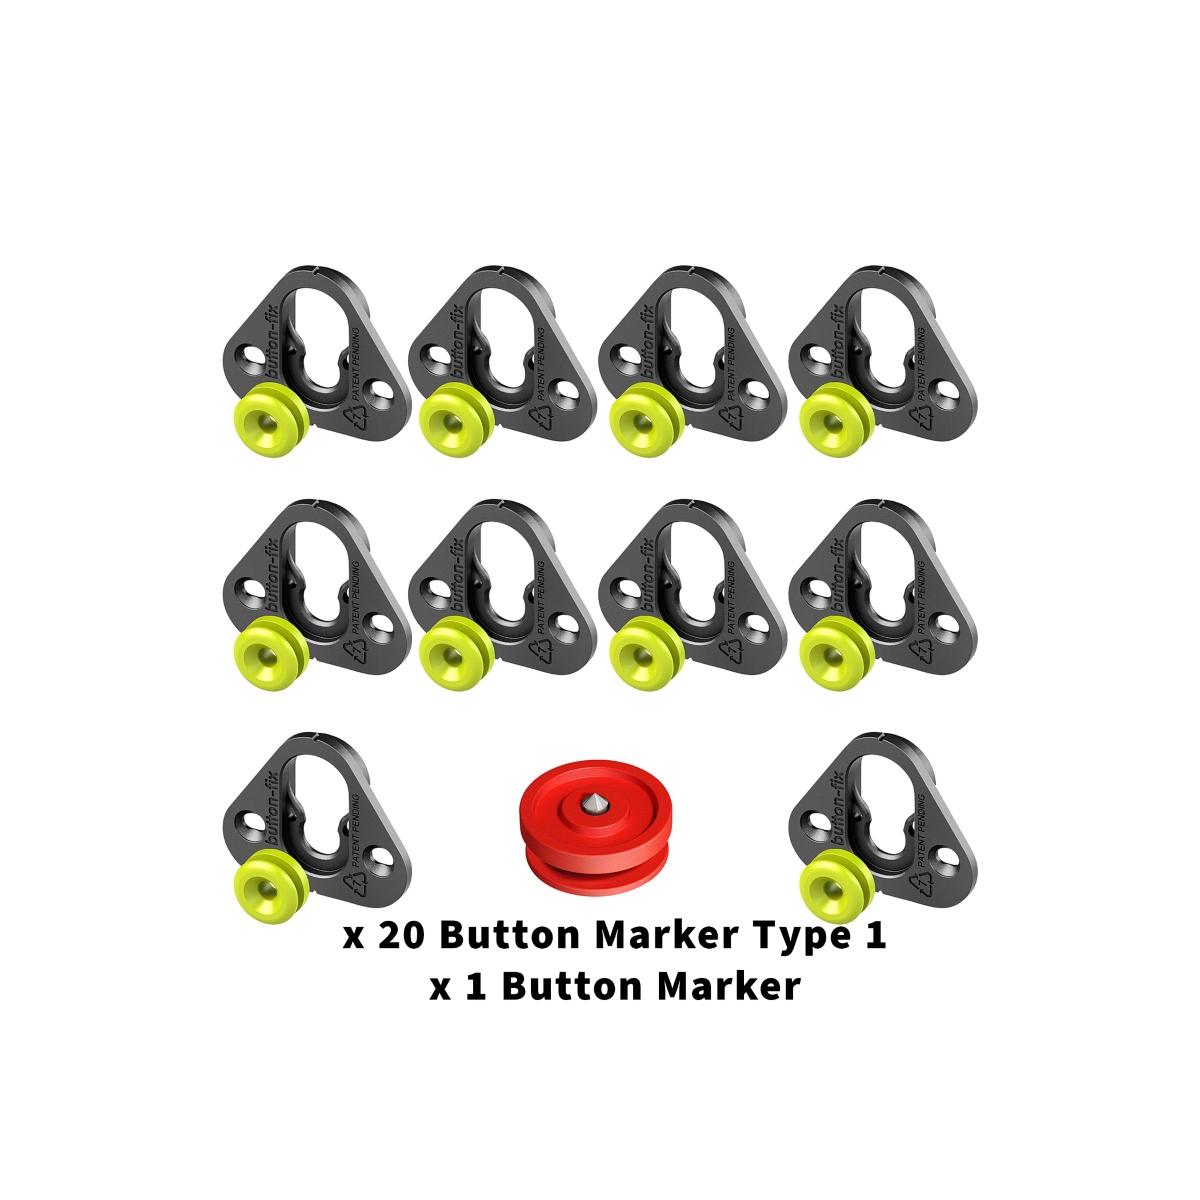 Button Fix Type 1 Bracket Marker Guide Kit Connecting Parallel Panels x20 + 1 Marker Tool